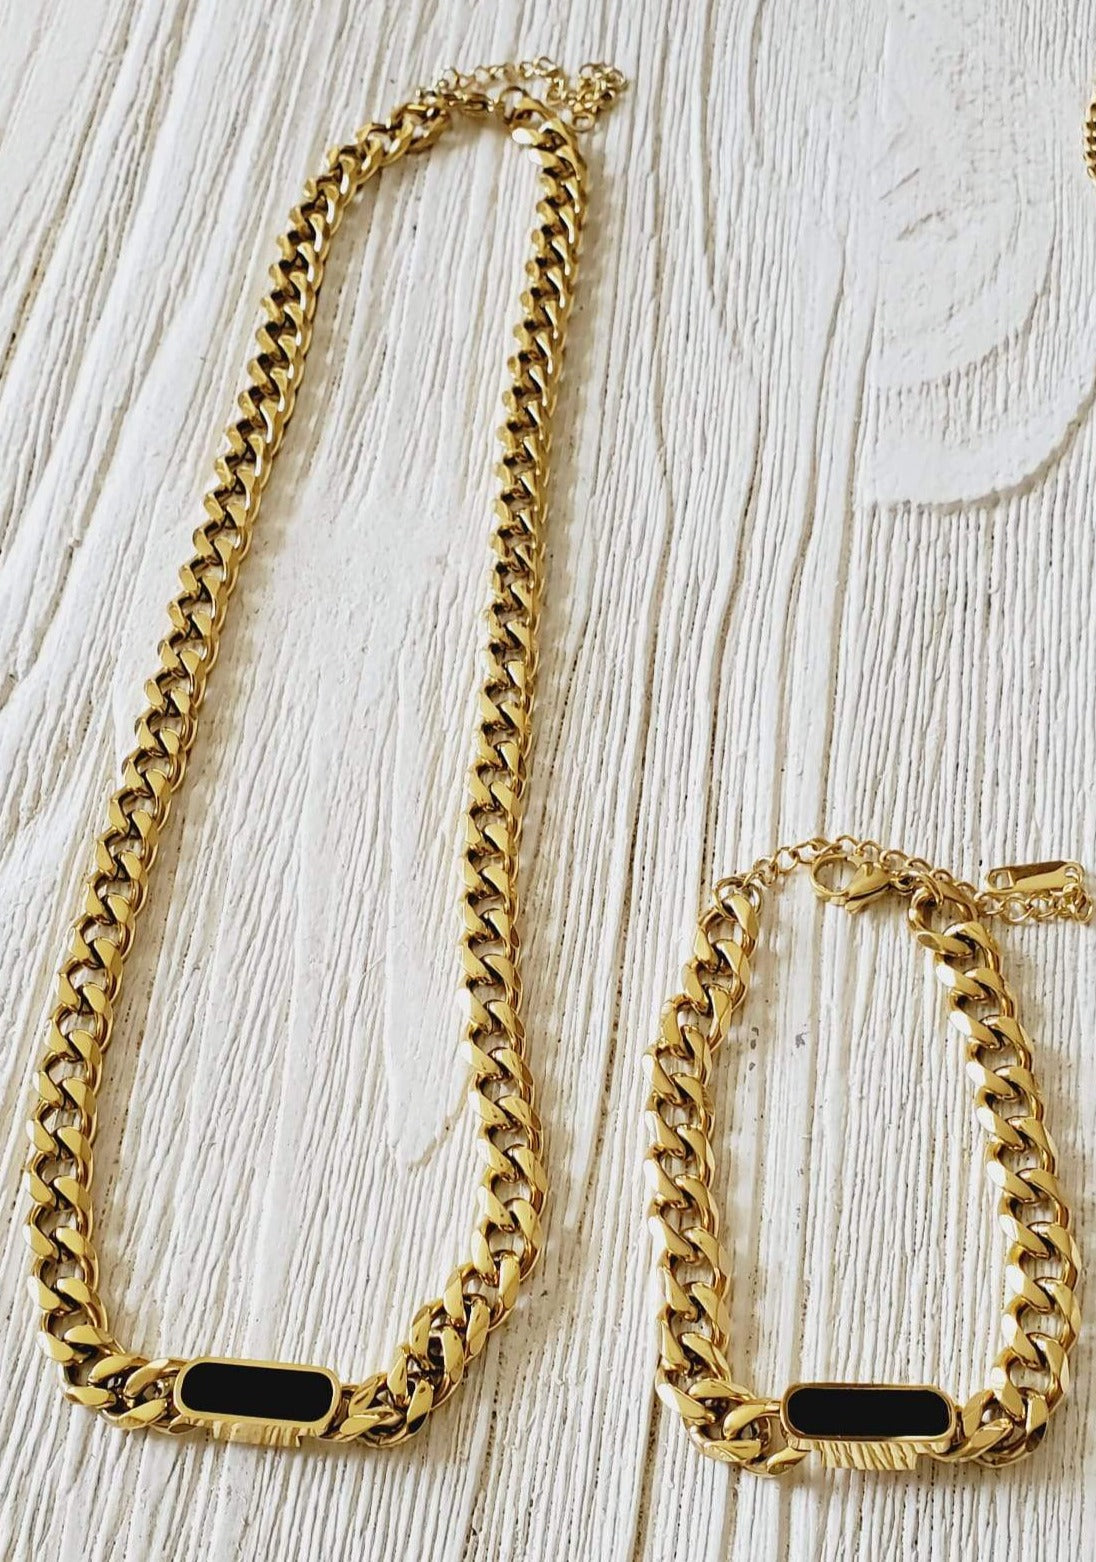 Mariner Link Chain, Heavy Chain Necklace, Thick Gold Chain, Chunky Gold Choker, Puffy Mariner Chain, Gold Mariner Chain, Gold Anchor Link, Puff Link Chain, Mariner Necklace, Puffy Link Necklace, Gold Puff Chain, Thick Puff Necklace, black cubana jewelry, black chunky necklace, black chunky jewelry, black chunky set